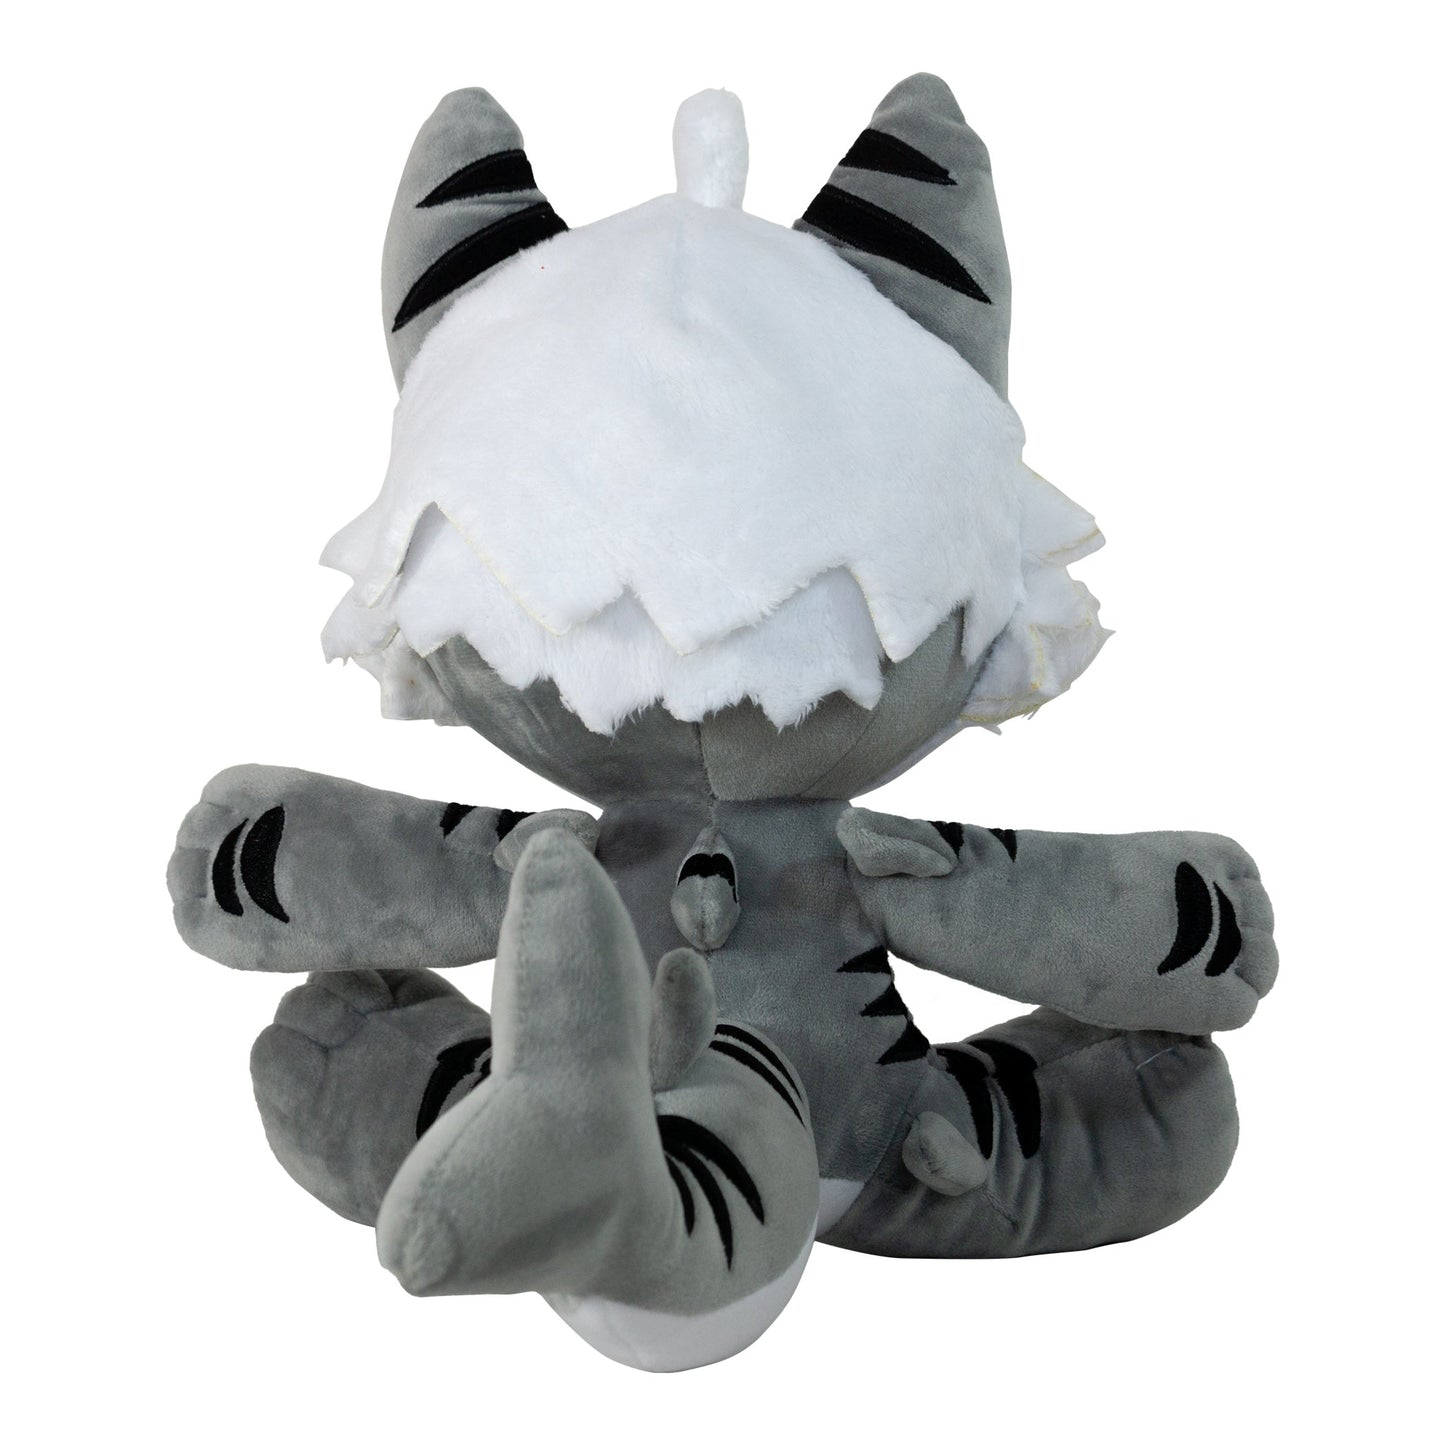 Changed Cute Tiger Shark Plush Toy - CH-MS-23 - Changed - 42shops